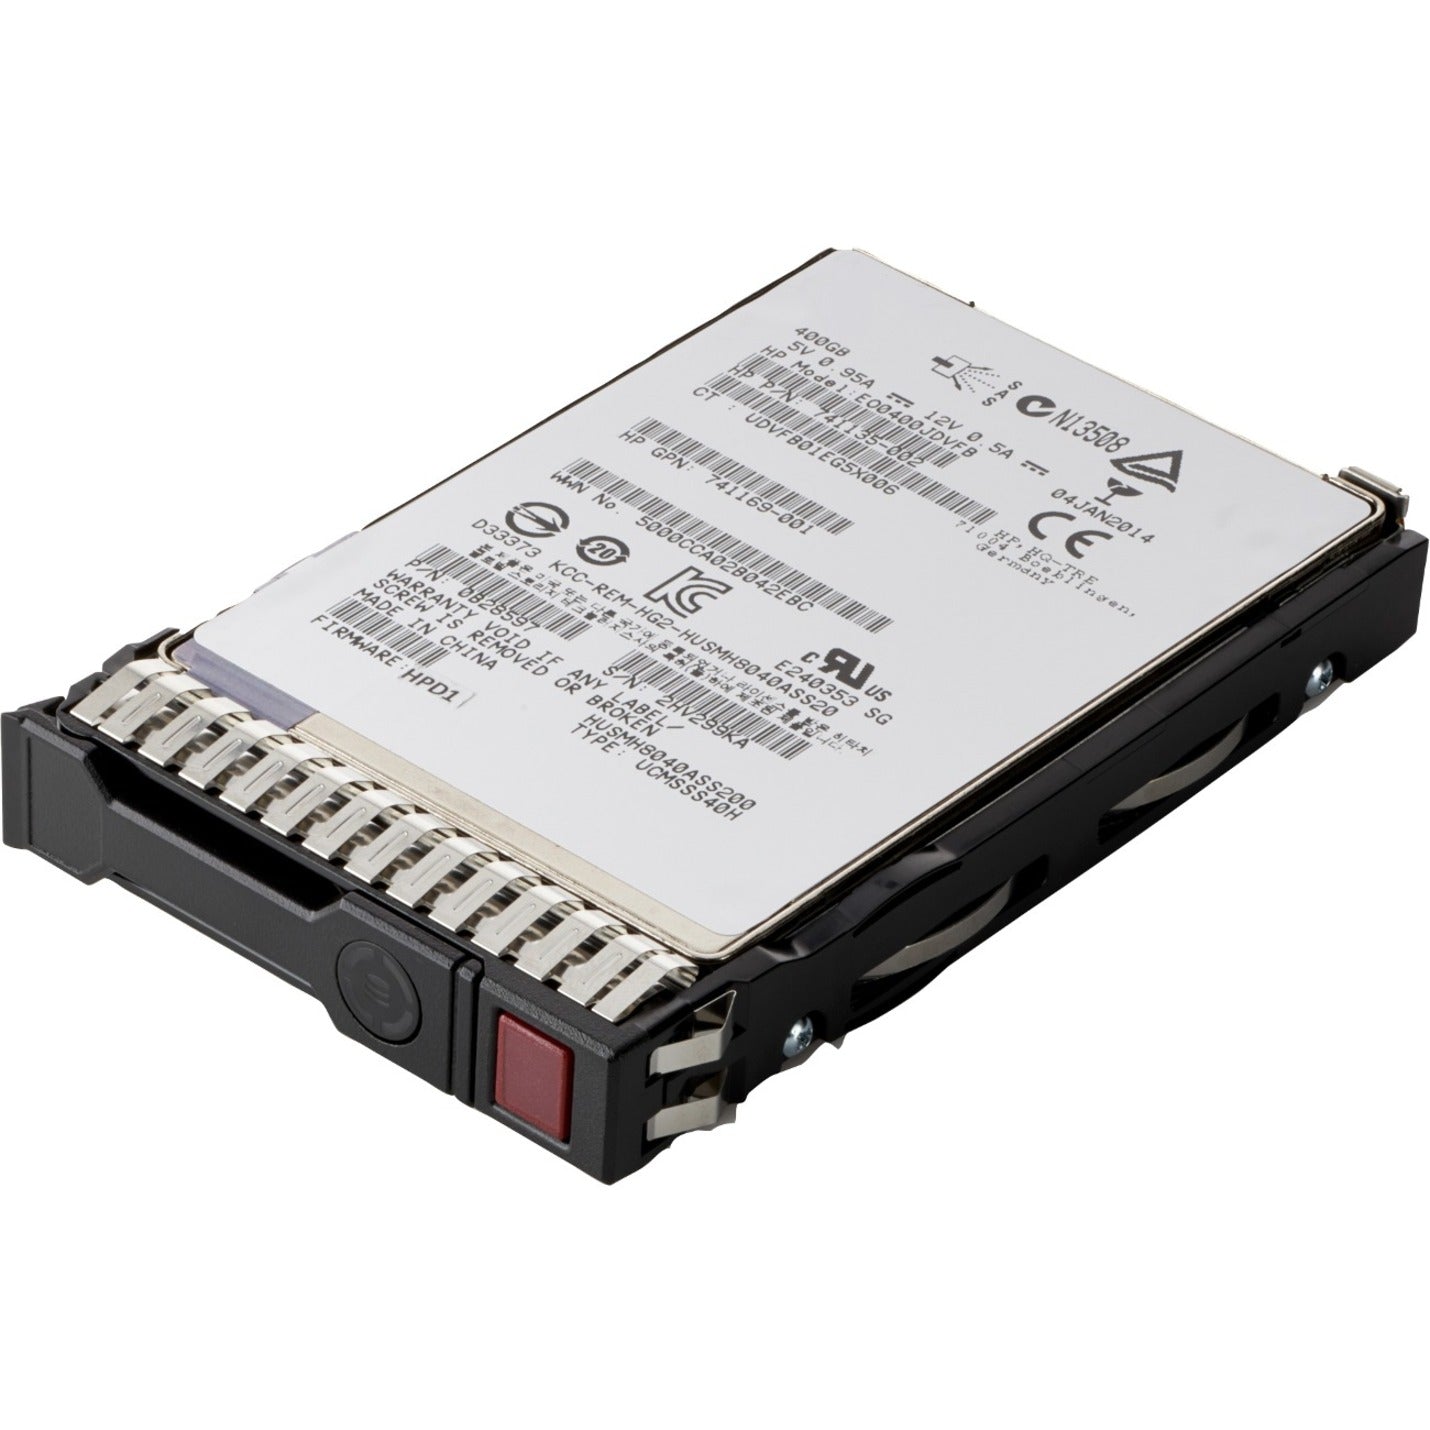 Accortec P07922-B21-ACC 480GB SATA 6G Mixed Use SFF (2.5in) SC 3yr Wty Digitally Signed Firmware SSD, Server-Compatible